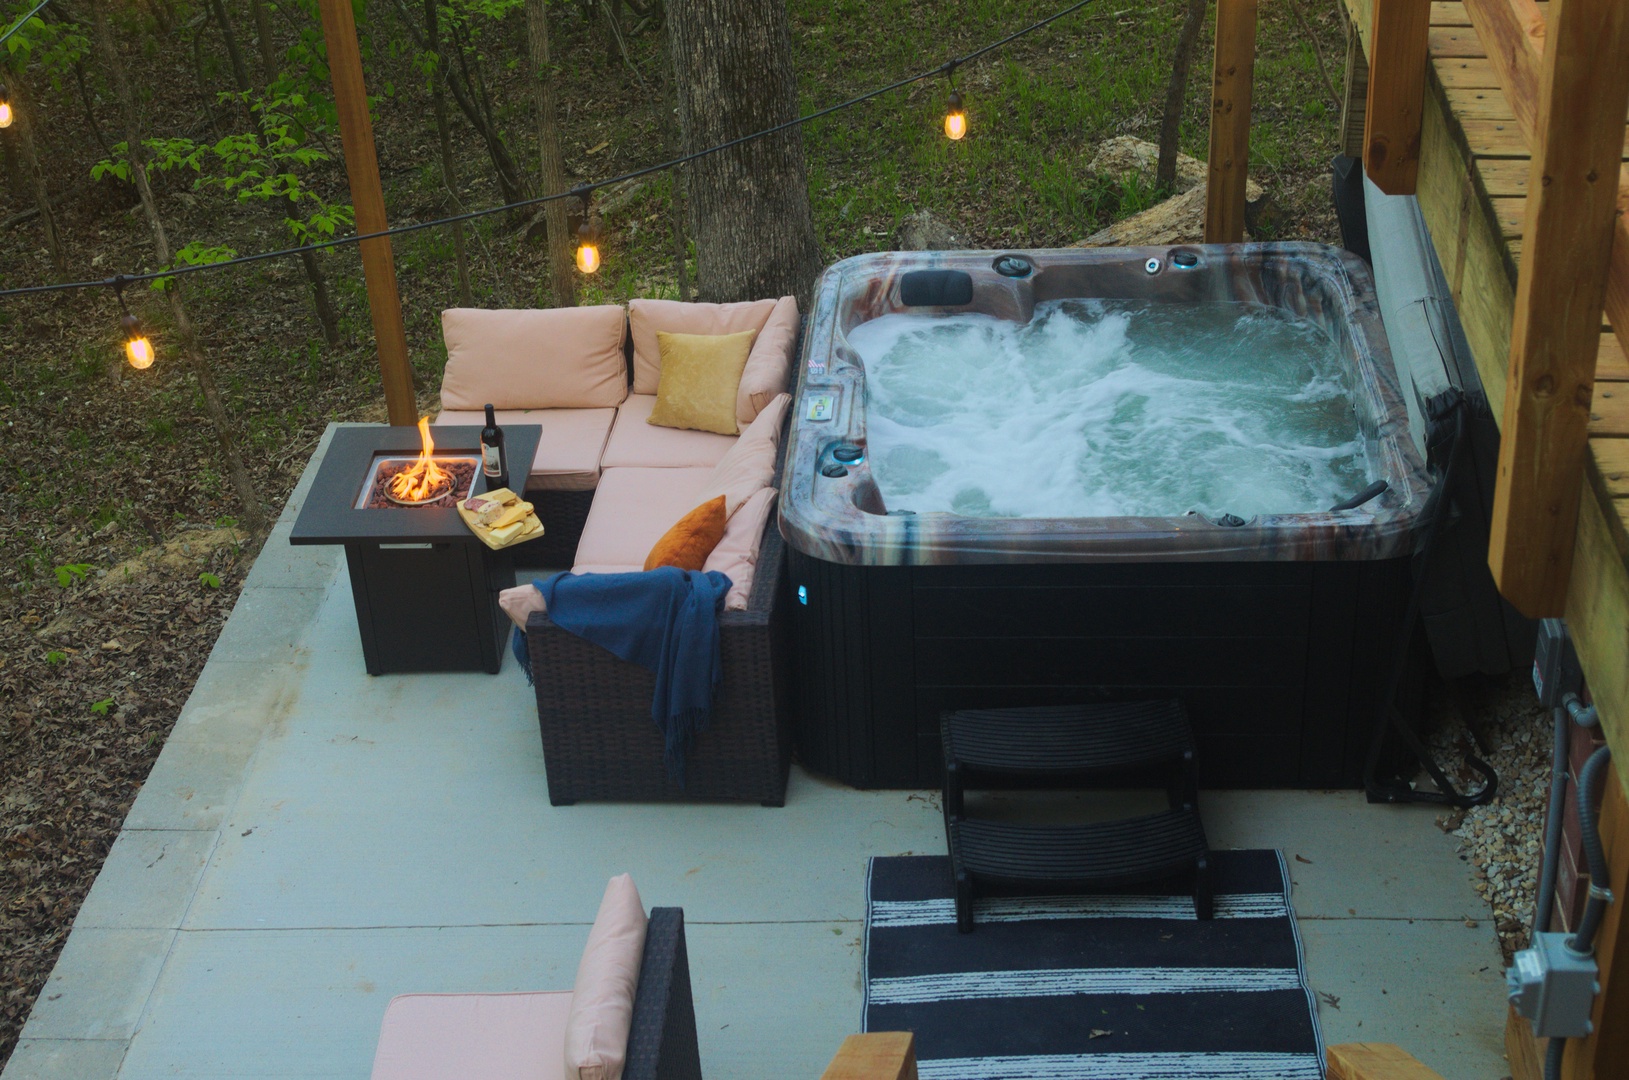 “The hot tub was awesome and well taken care of.” - April